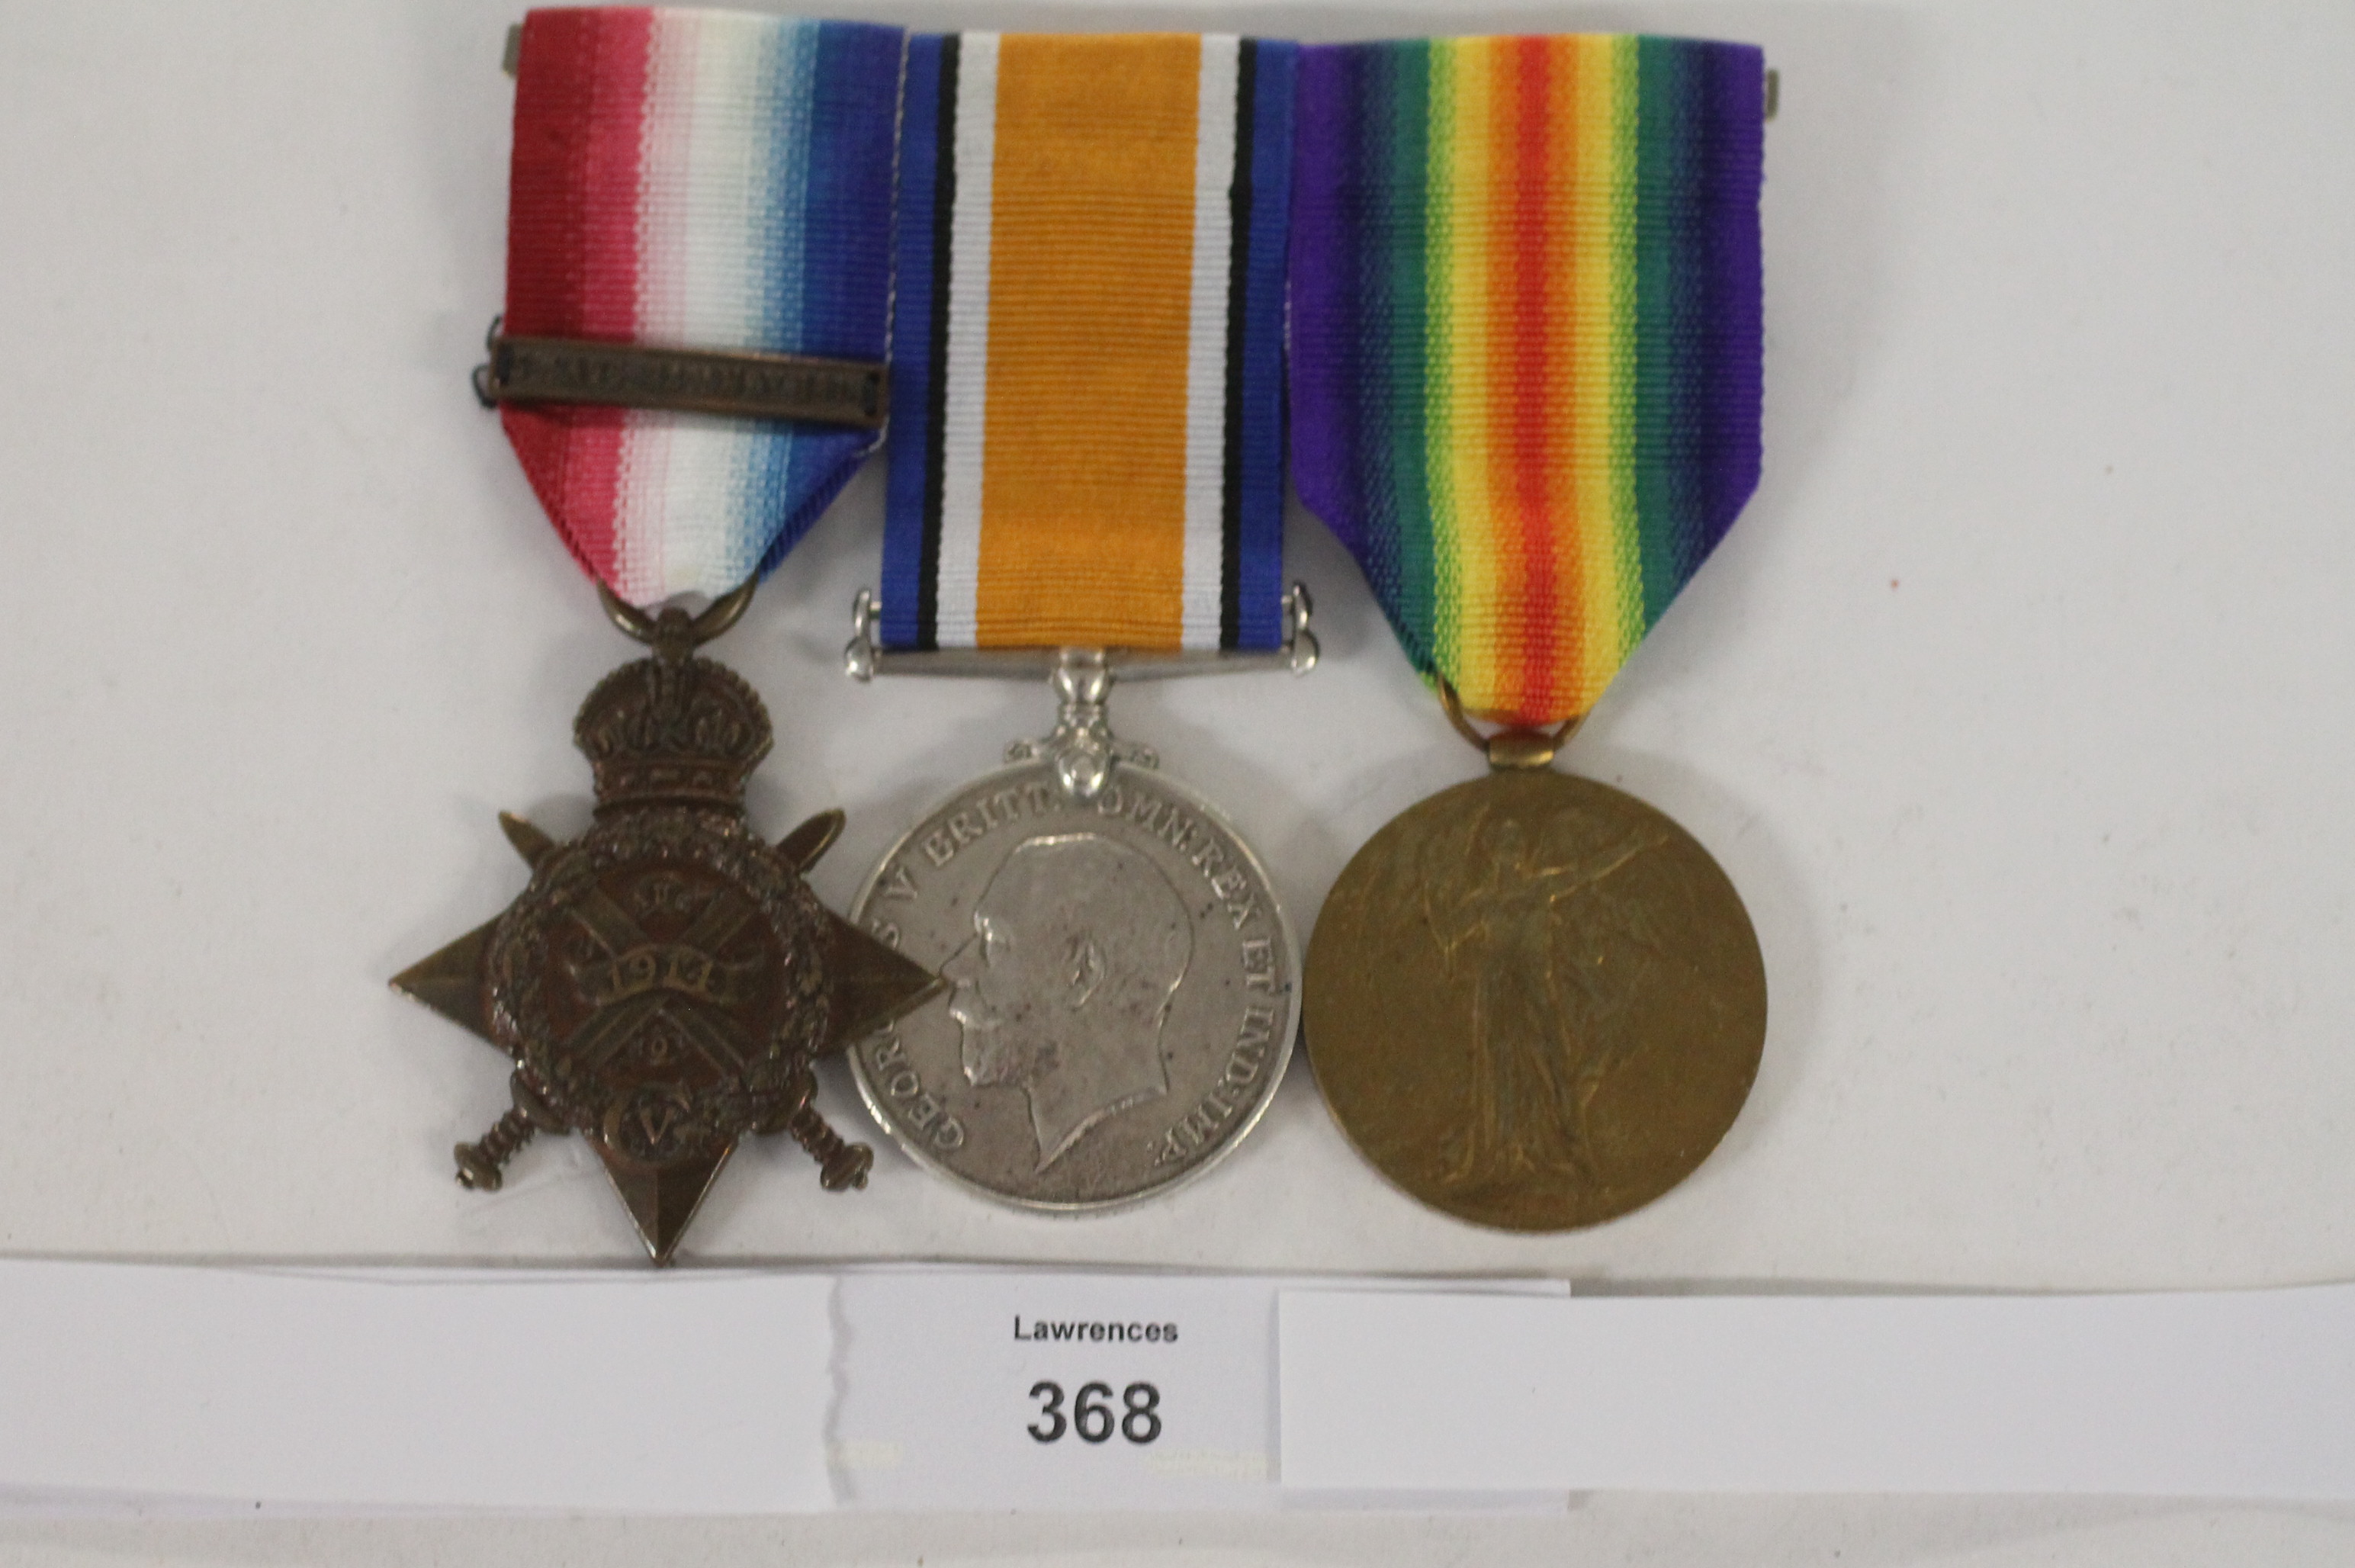 A SCOTS GUARDS 1914 STAR/BAR TRIO. A 1914 Star with bar also British War & Victory Medals named to